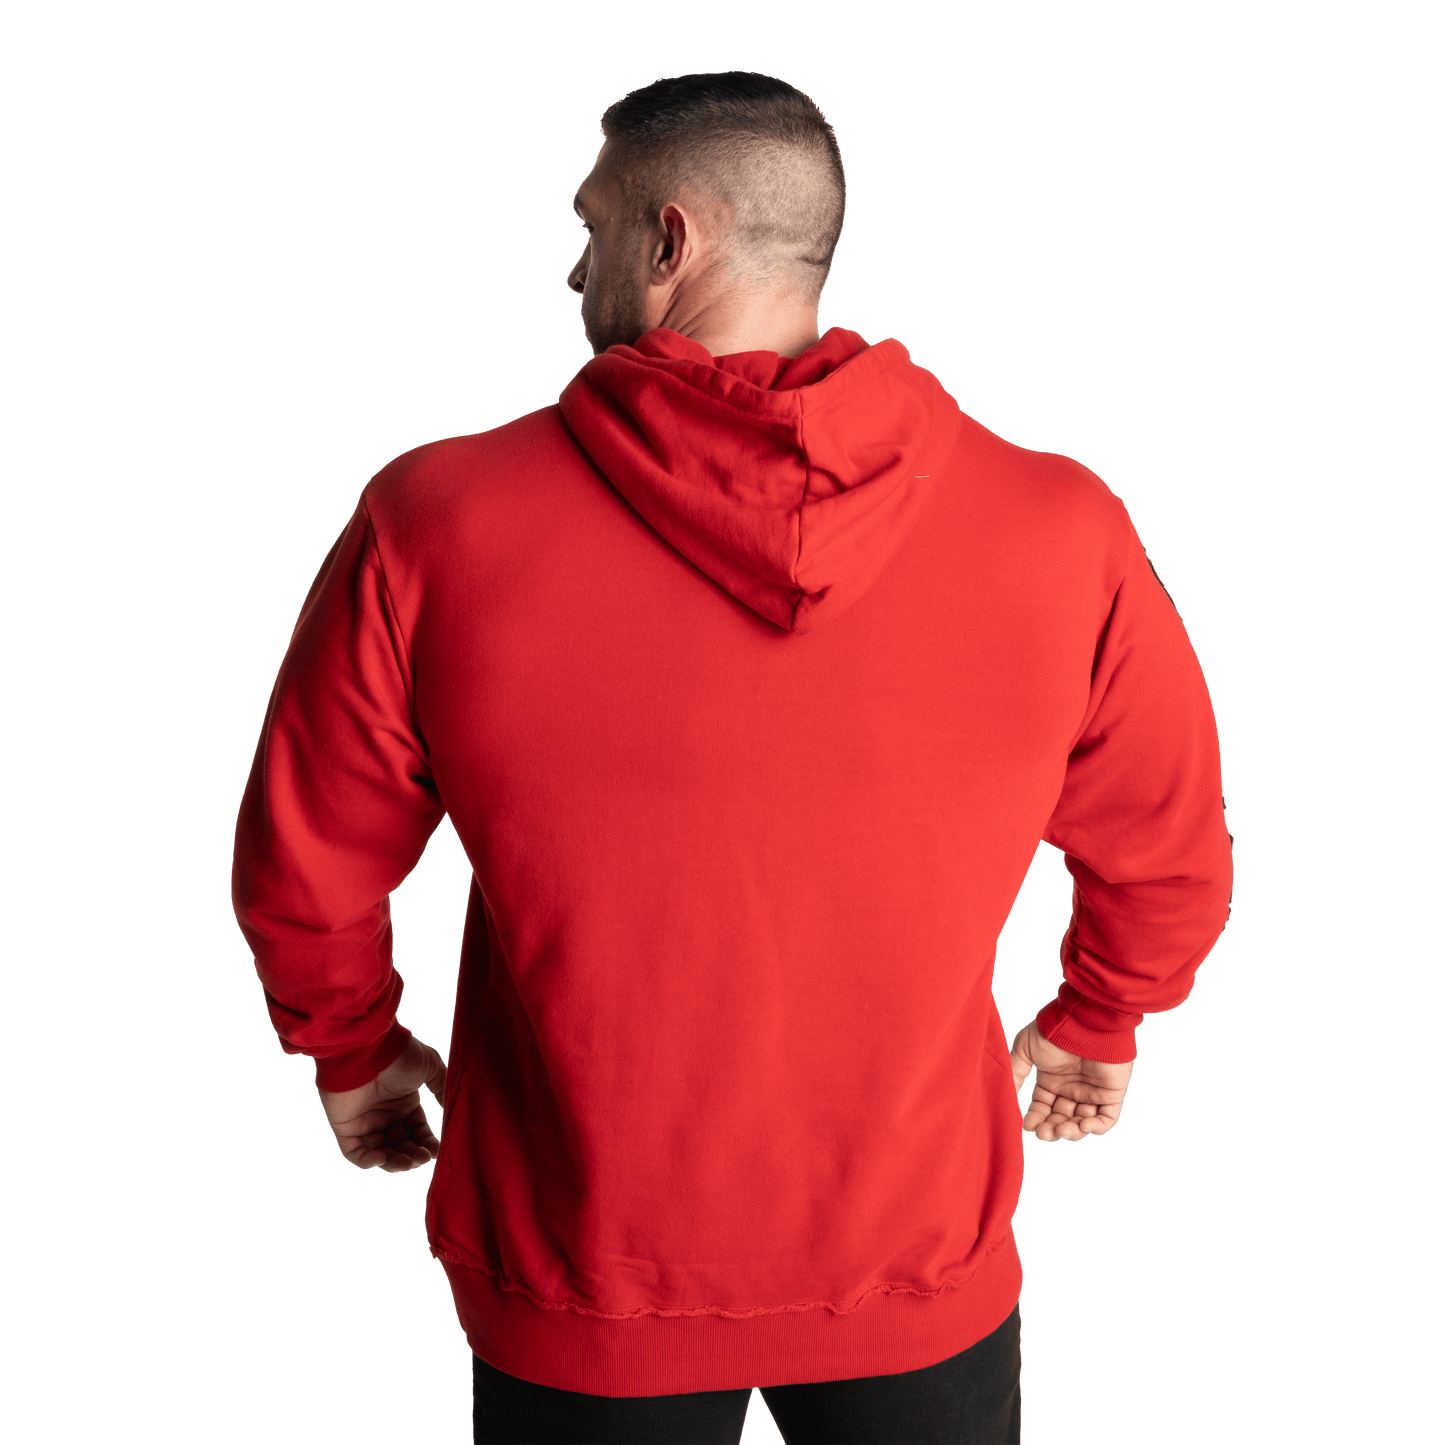 GASP Distressed Hood Chili Red